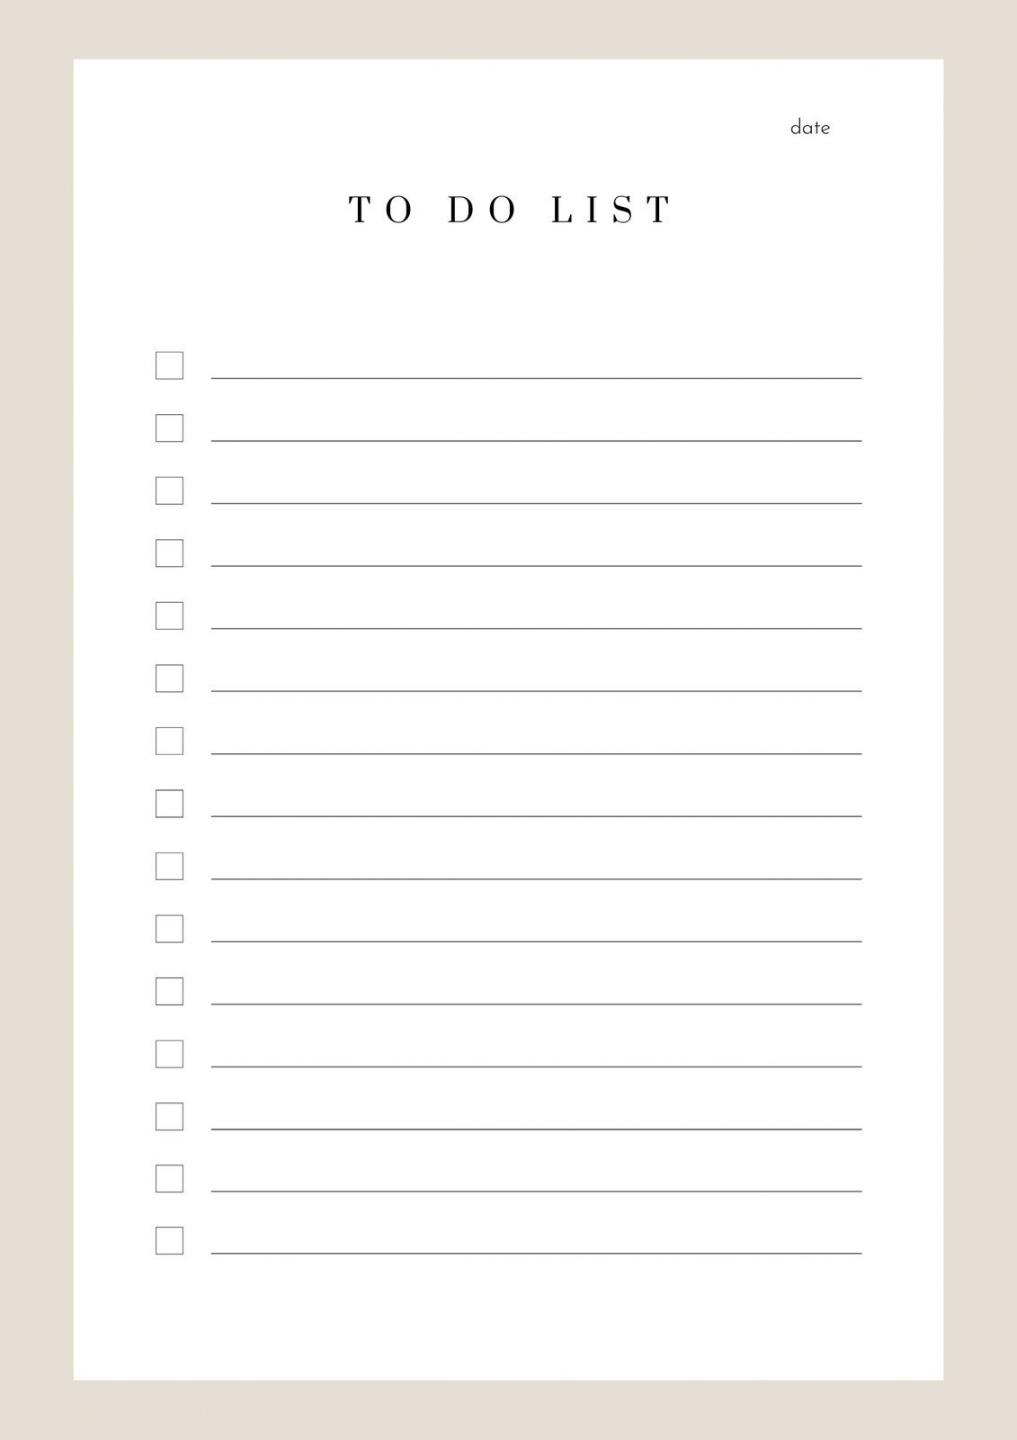 Free and customizable to do list templates - FREE Printables - Free Printable To Do List